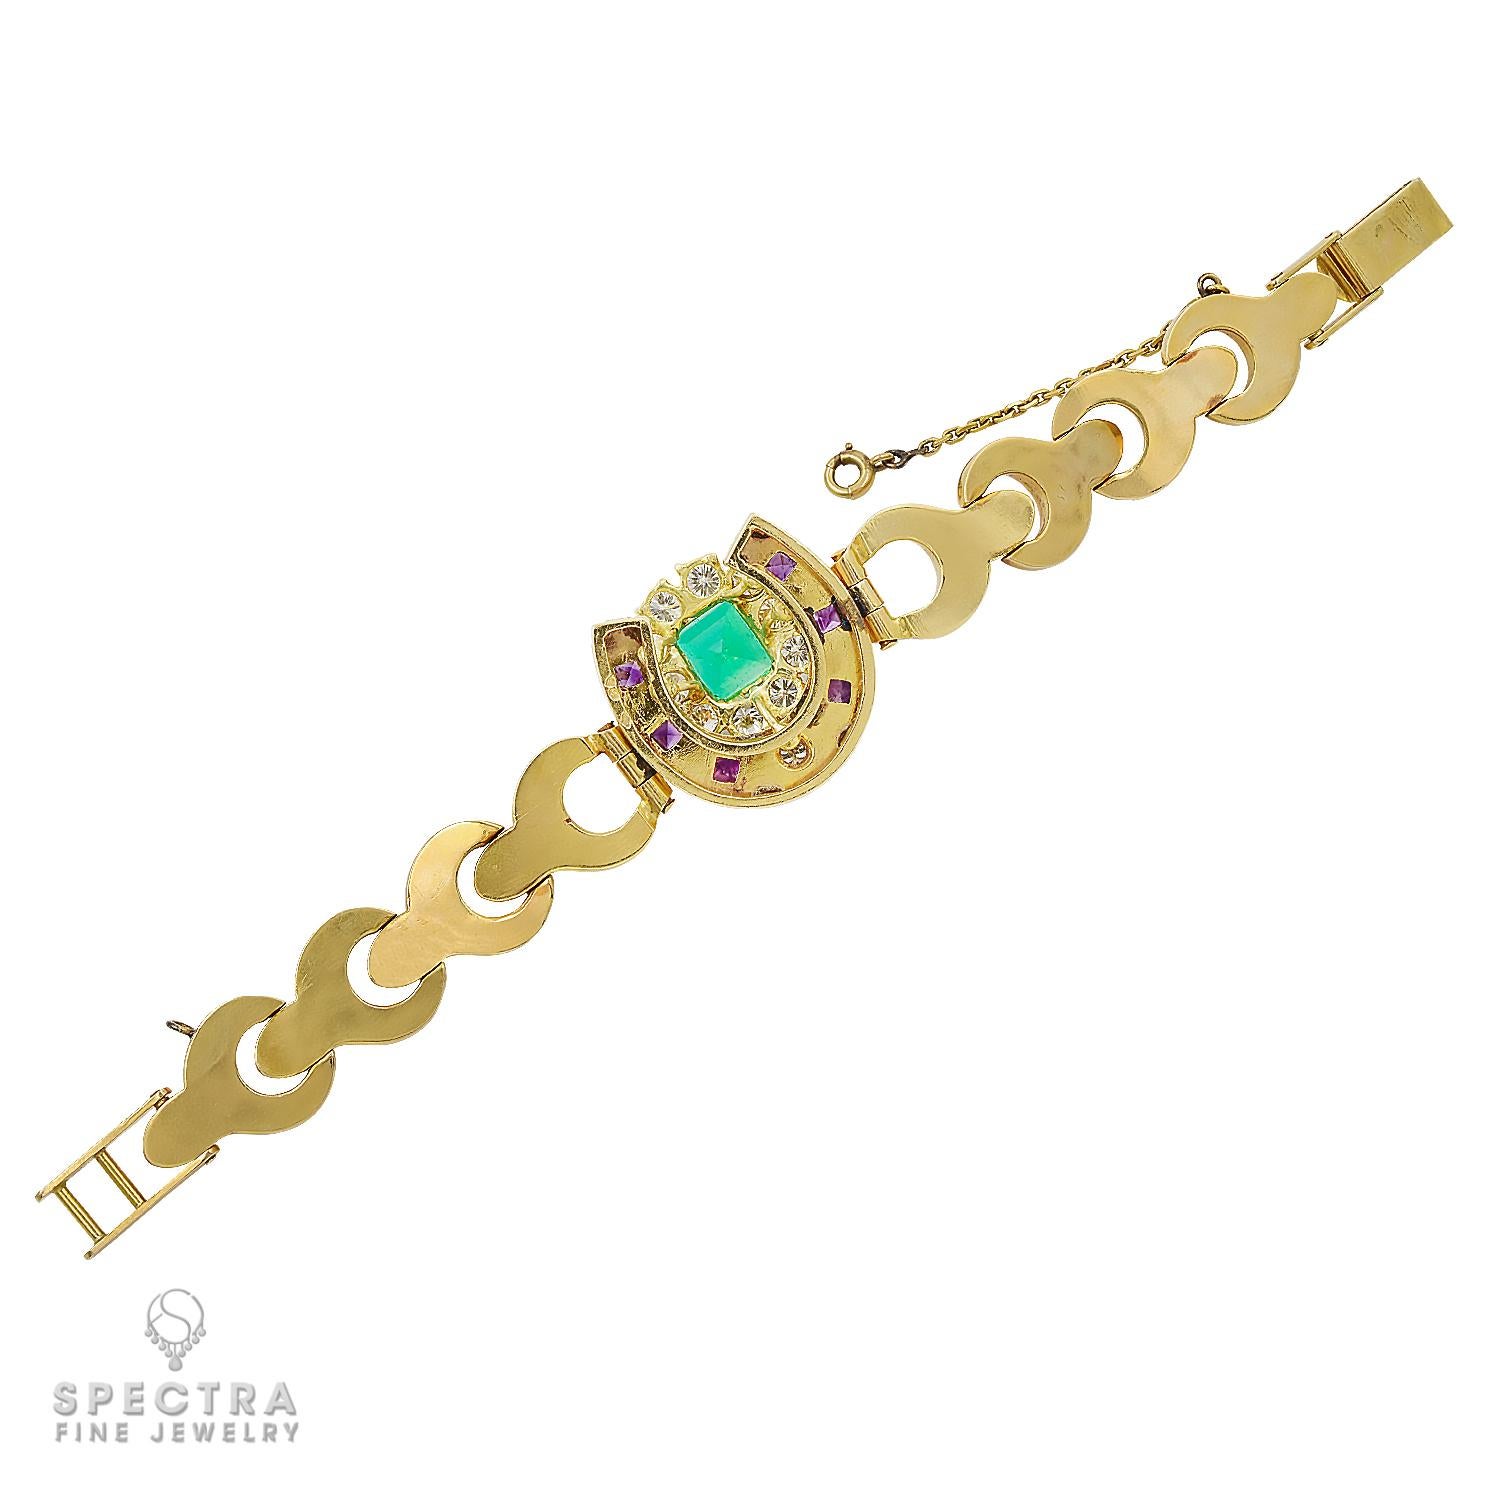 This stunning French vintage bracelet made approximately in the 1980s, is the perfect blend of timeless elegance and exquisite design. Crafted from 18k yellow gold, it features a captivating square-cut emerald at its center, surrounded by 11 round